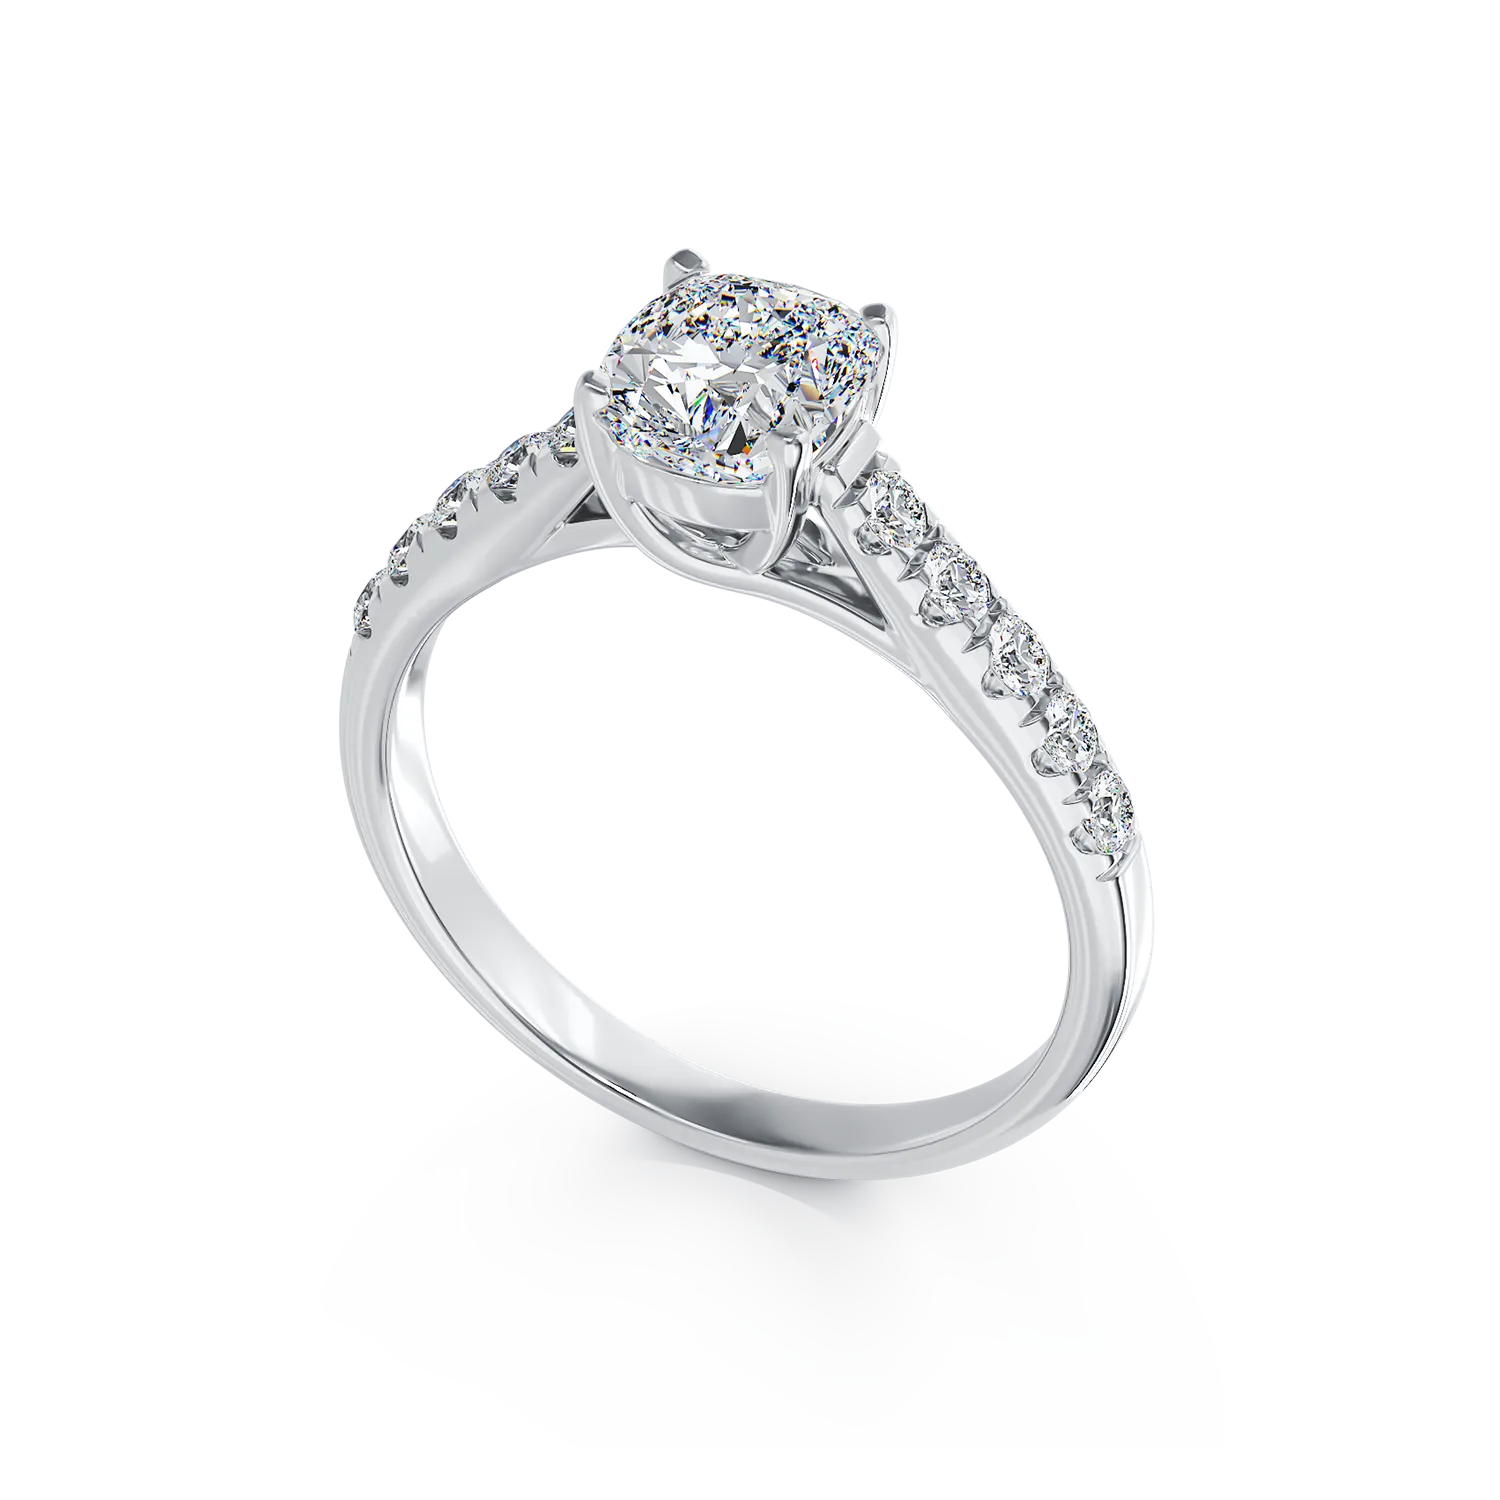 18K white gold engagement ring with 0.94ct diamond and 0.22ct diamonds